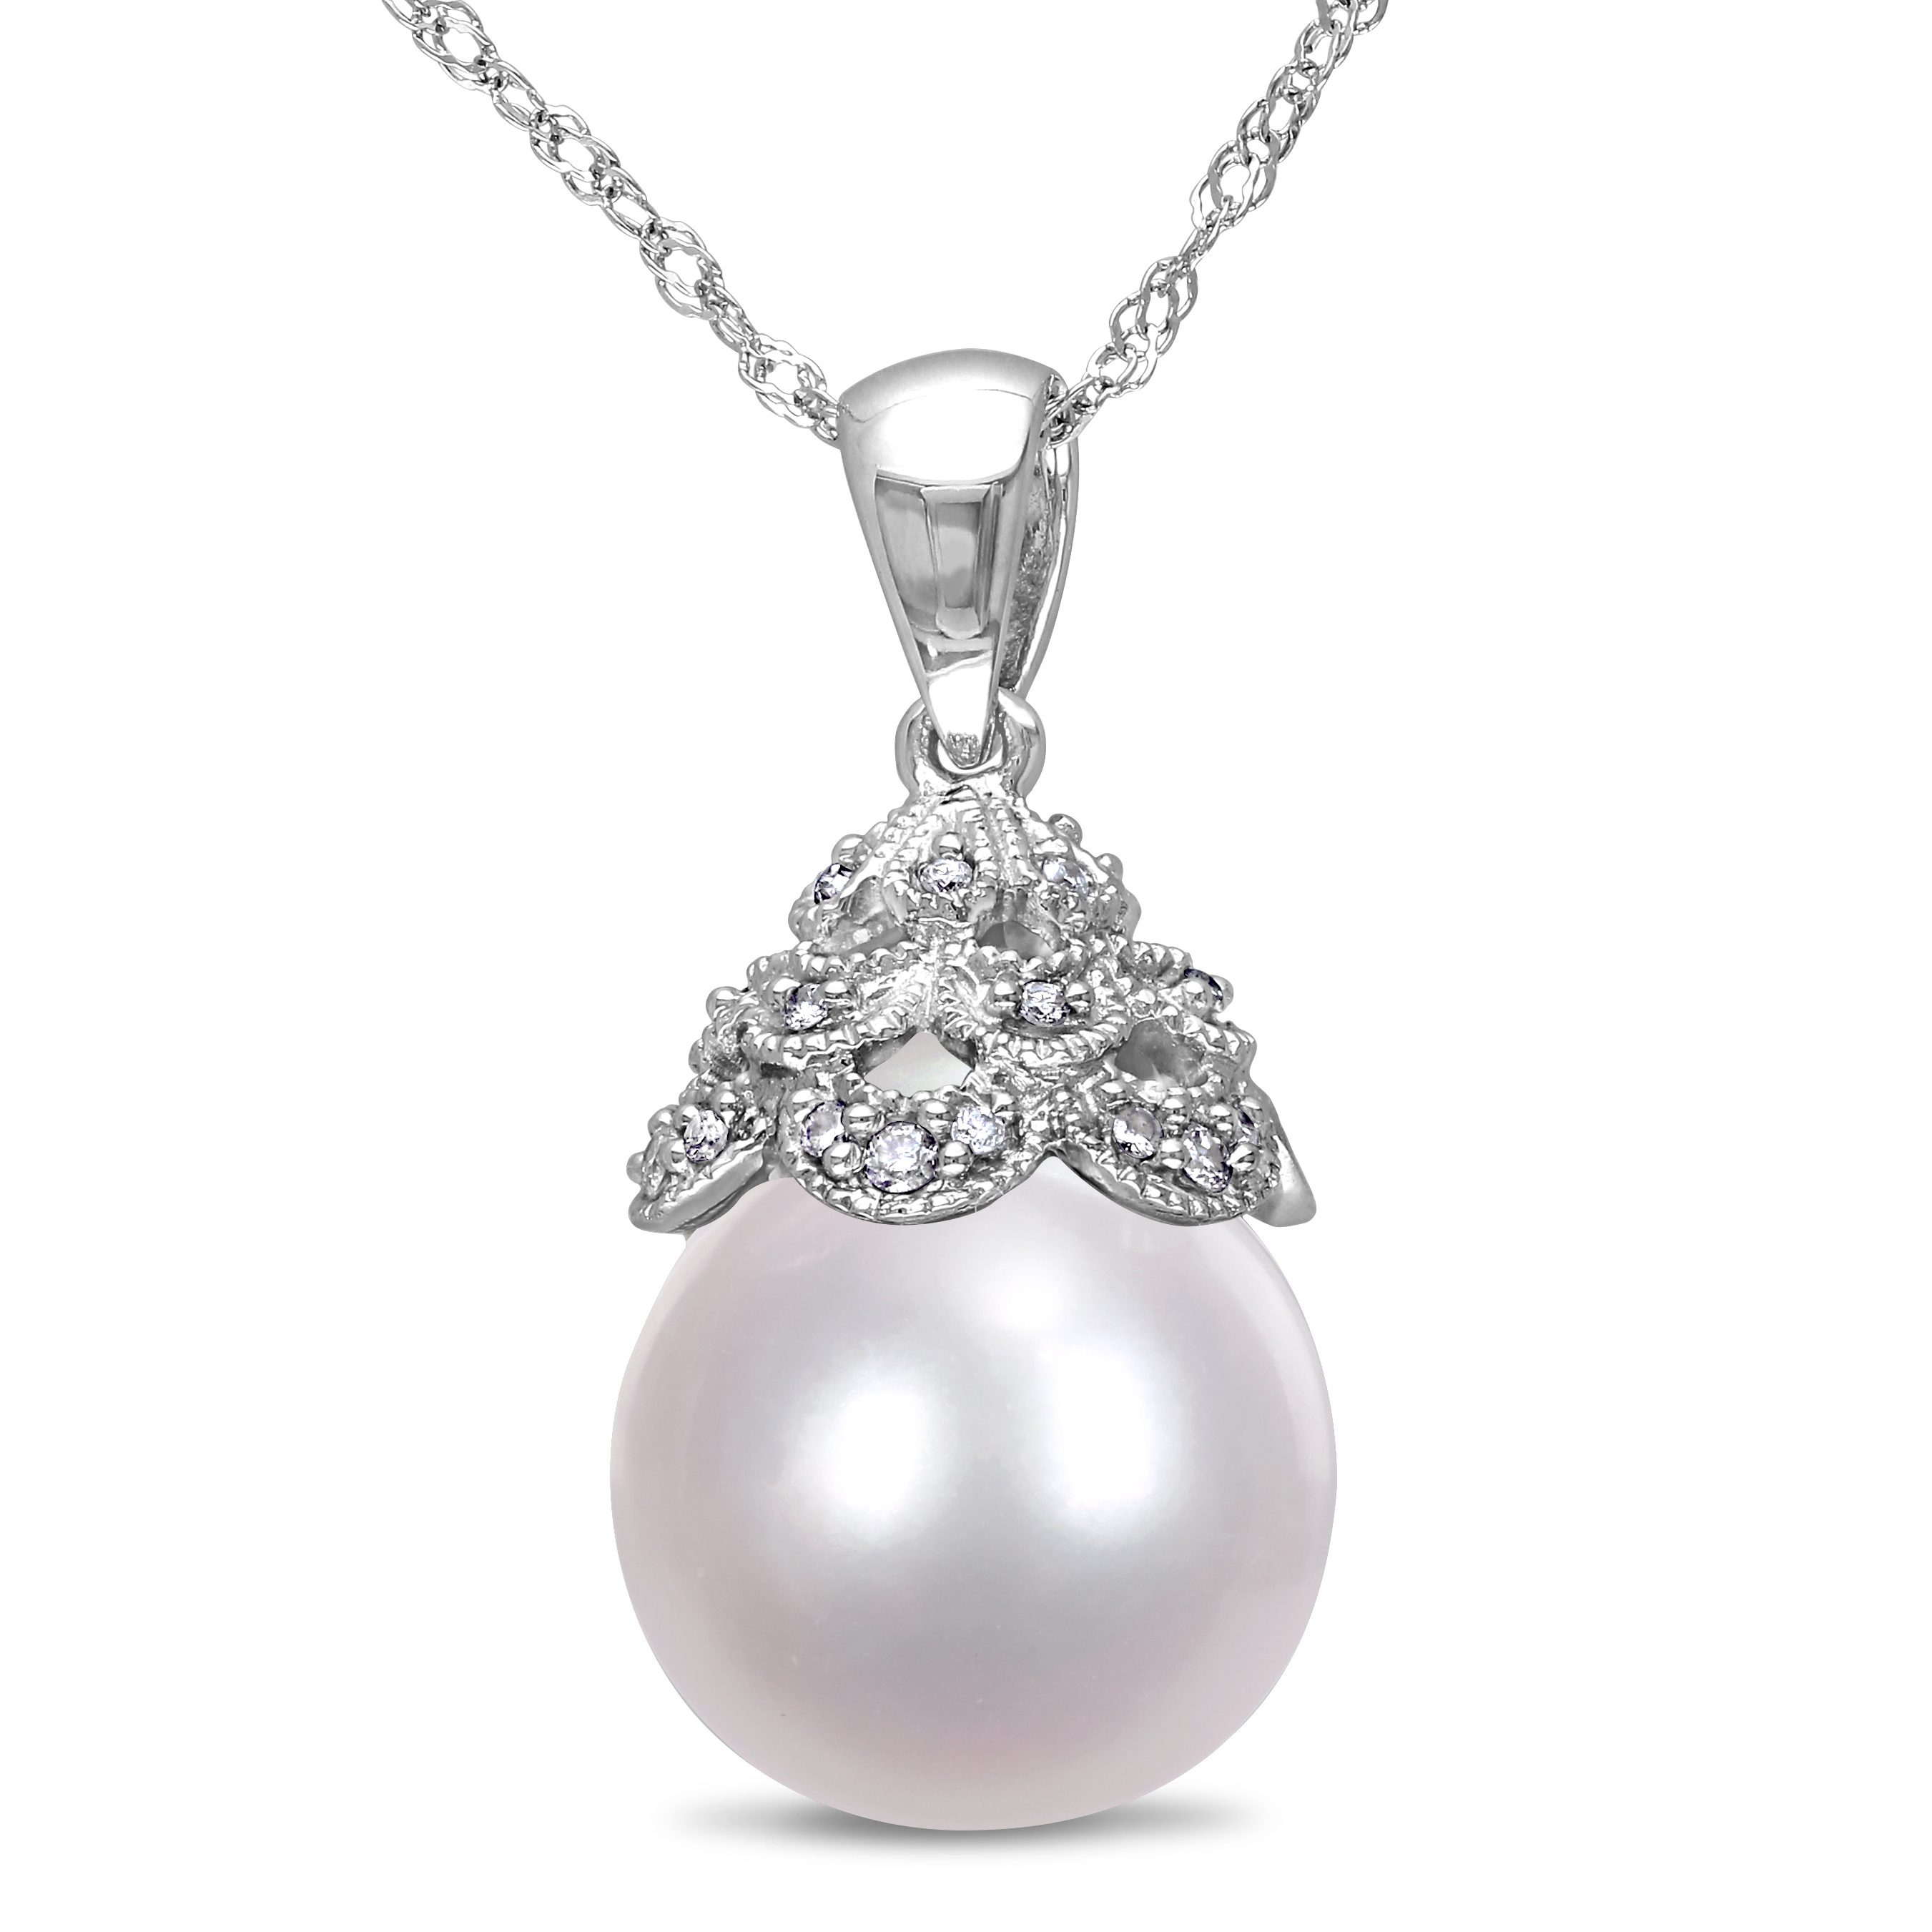 10.5-11 MM South Sea Cultured Pearl and Diamond Accent Filigree Pendant with Chain in 14k White Gold